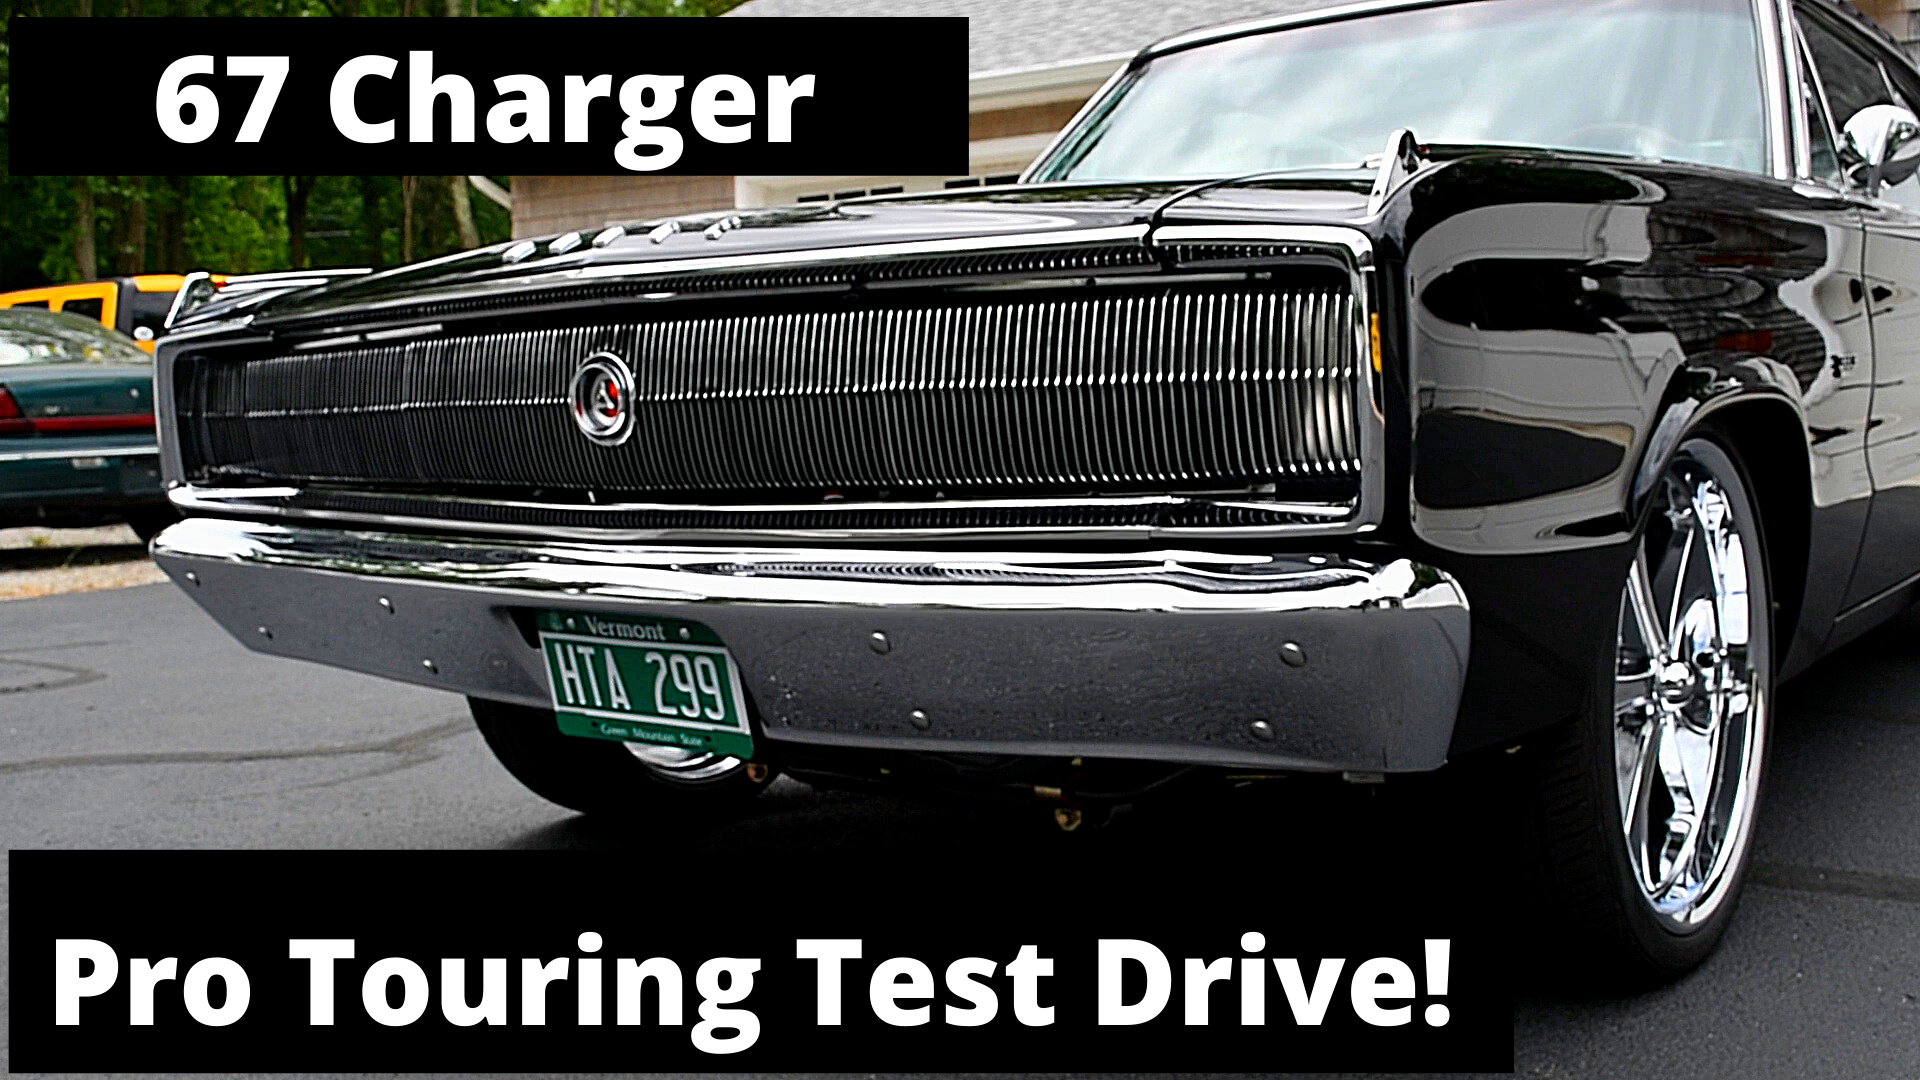 67 Charger Protouring Test Drive